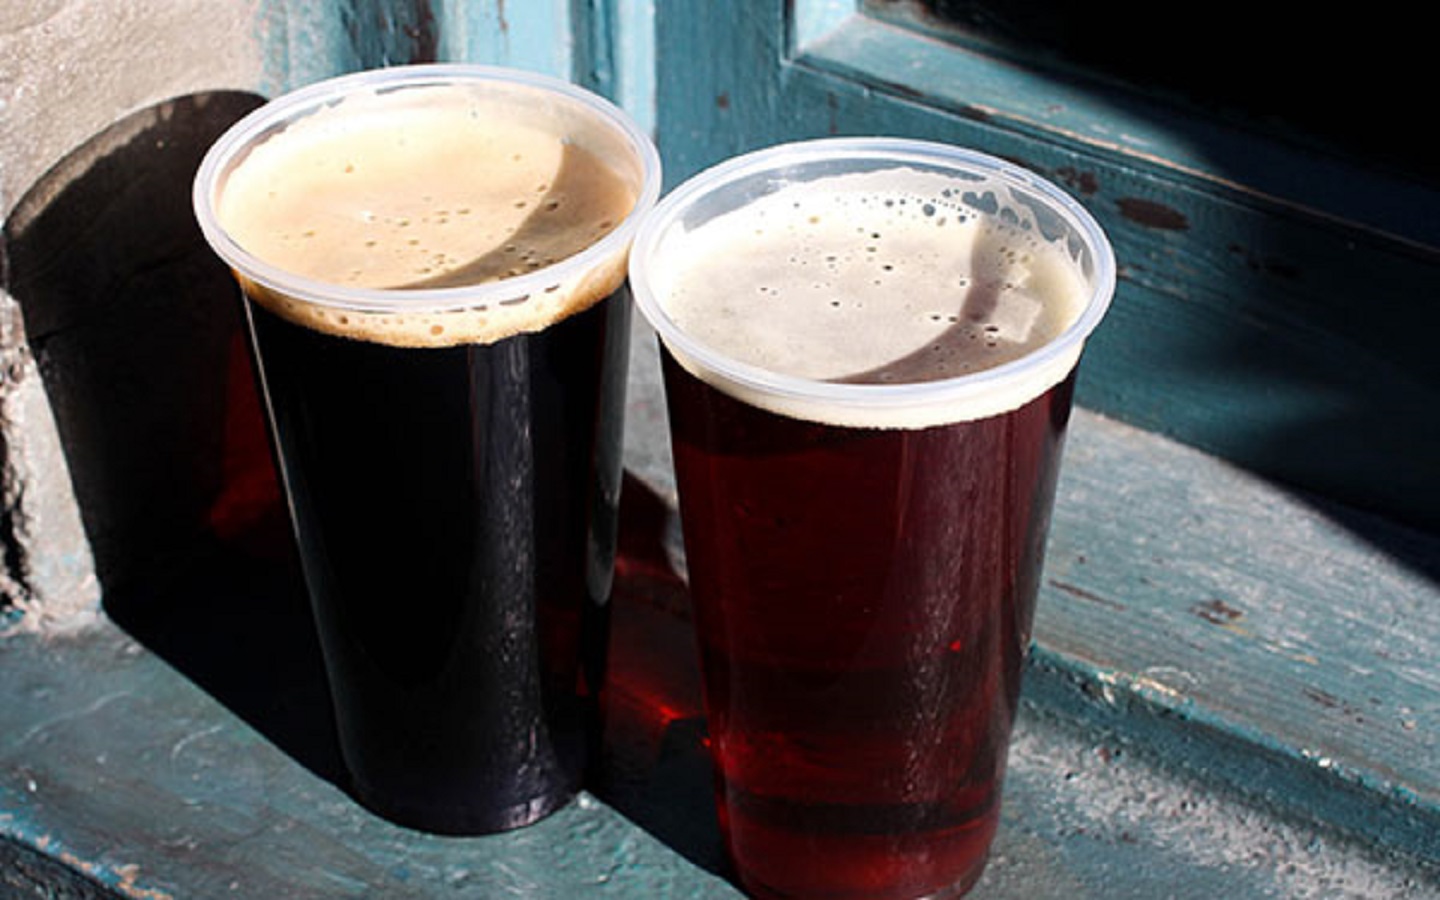 Wizard's Brew & Dragon Scale Beer at The Wizarding World of Harry Potter - Diagon Alley